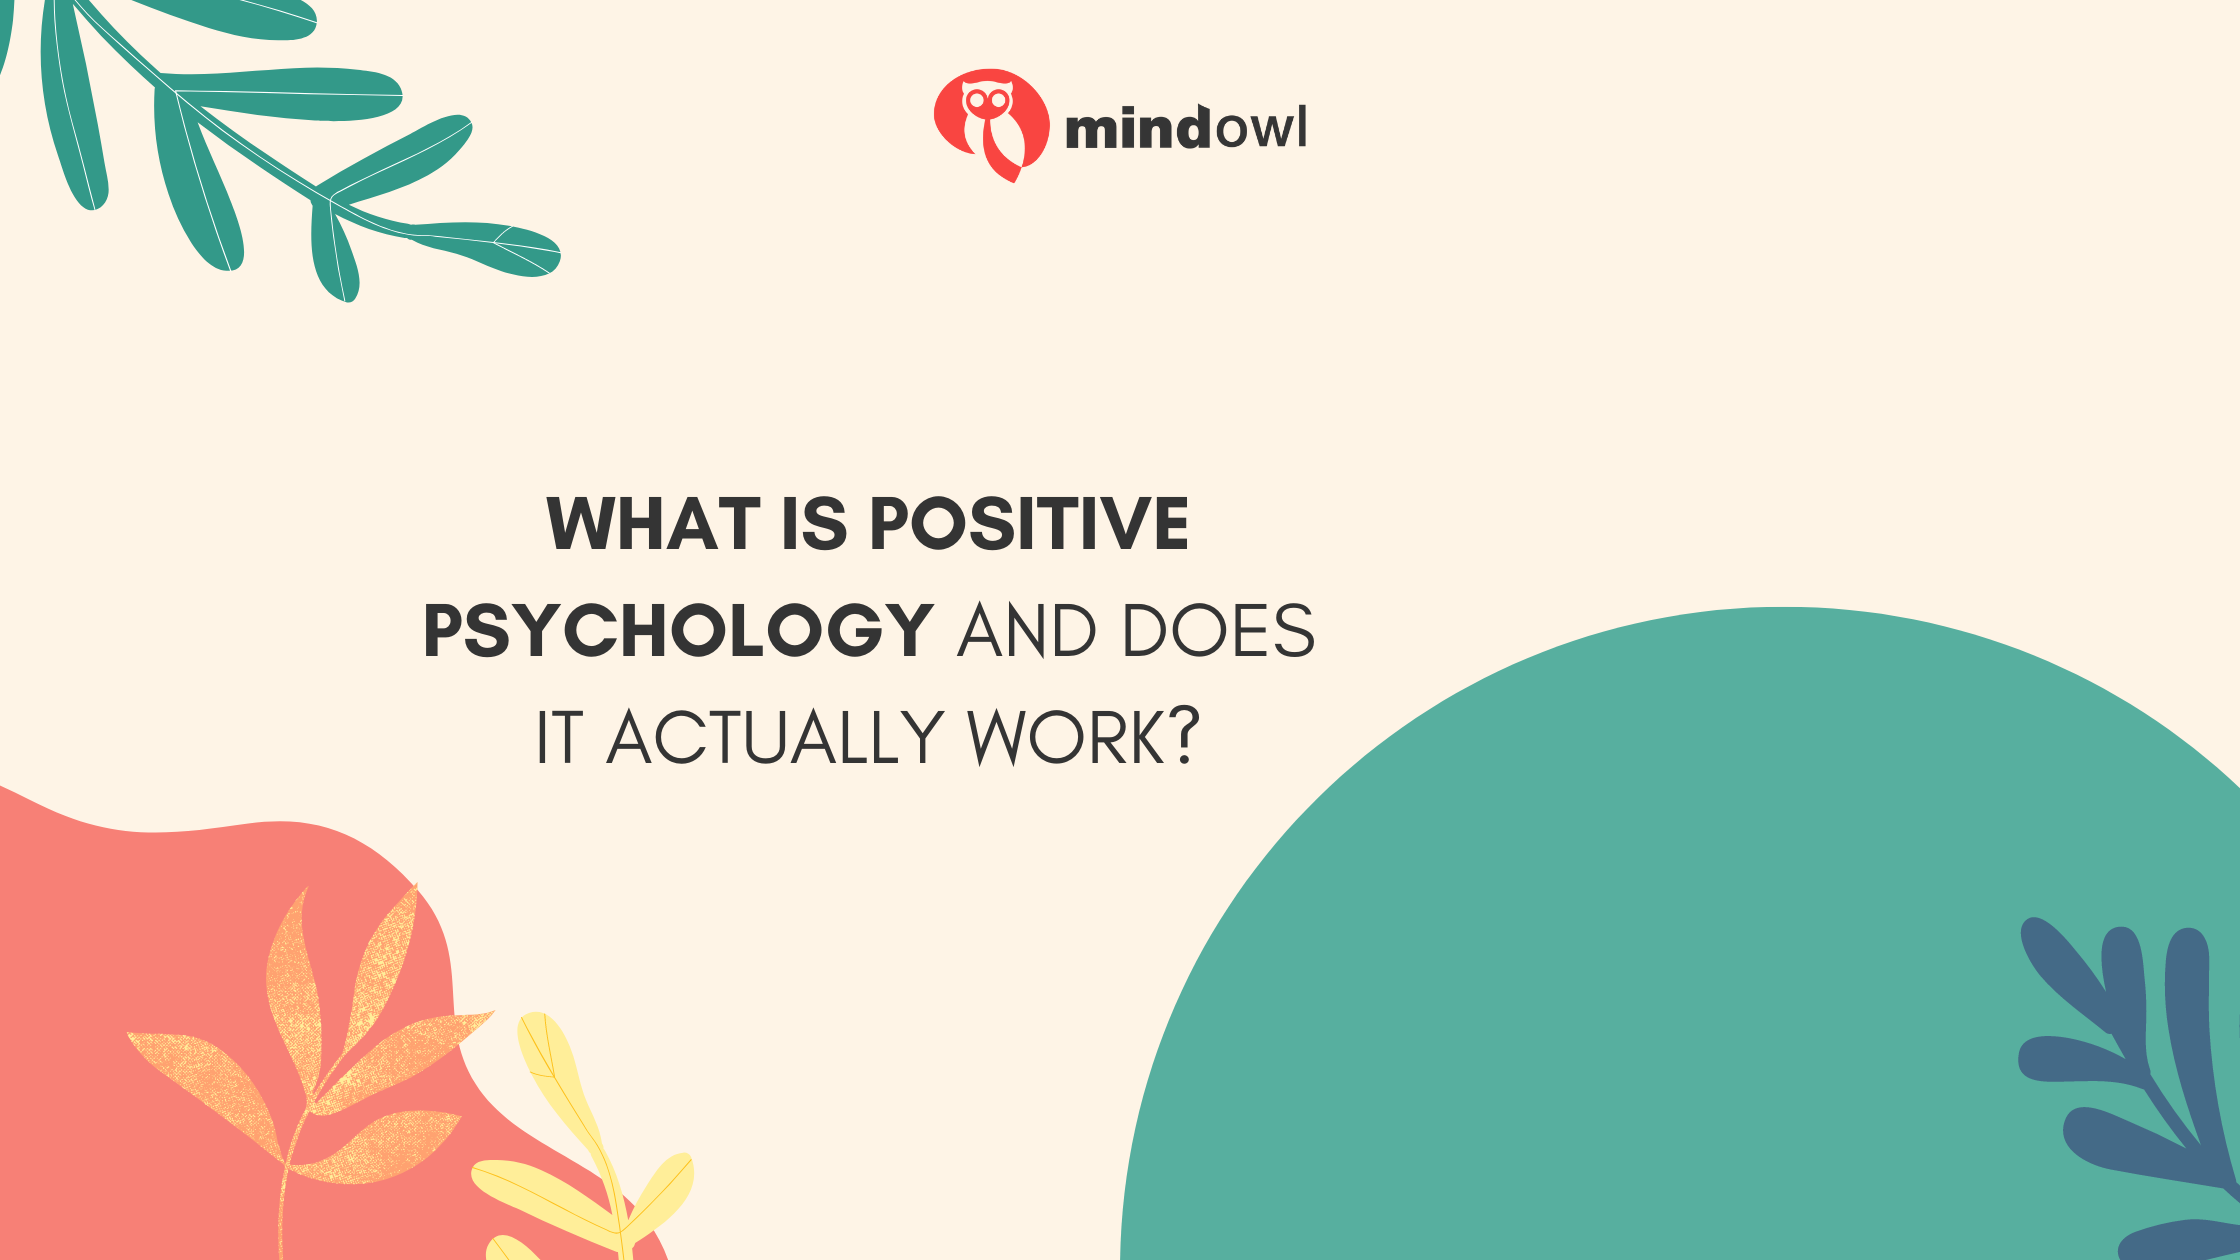 What is positive psychology and does it actually work?